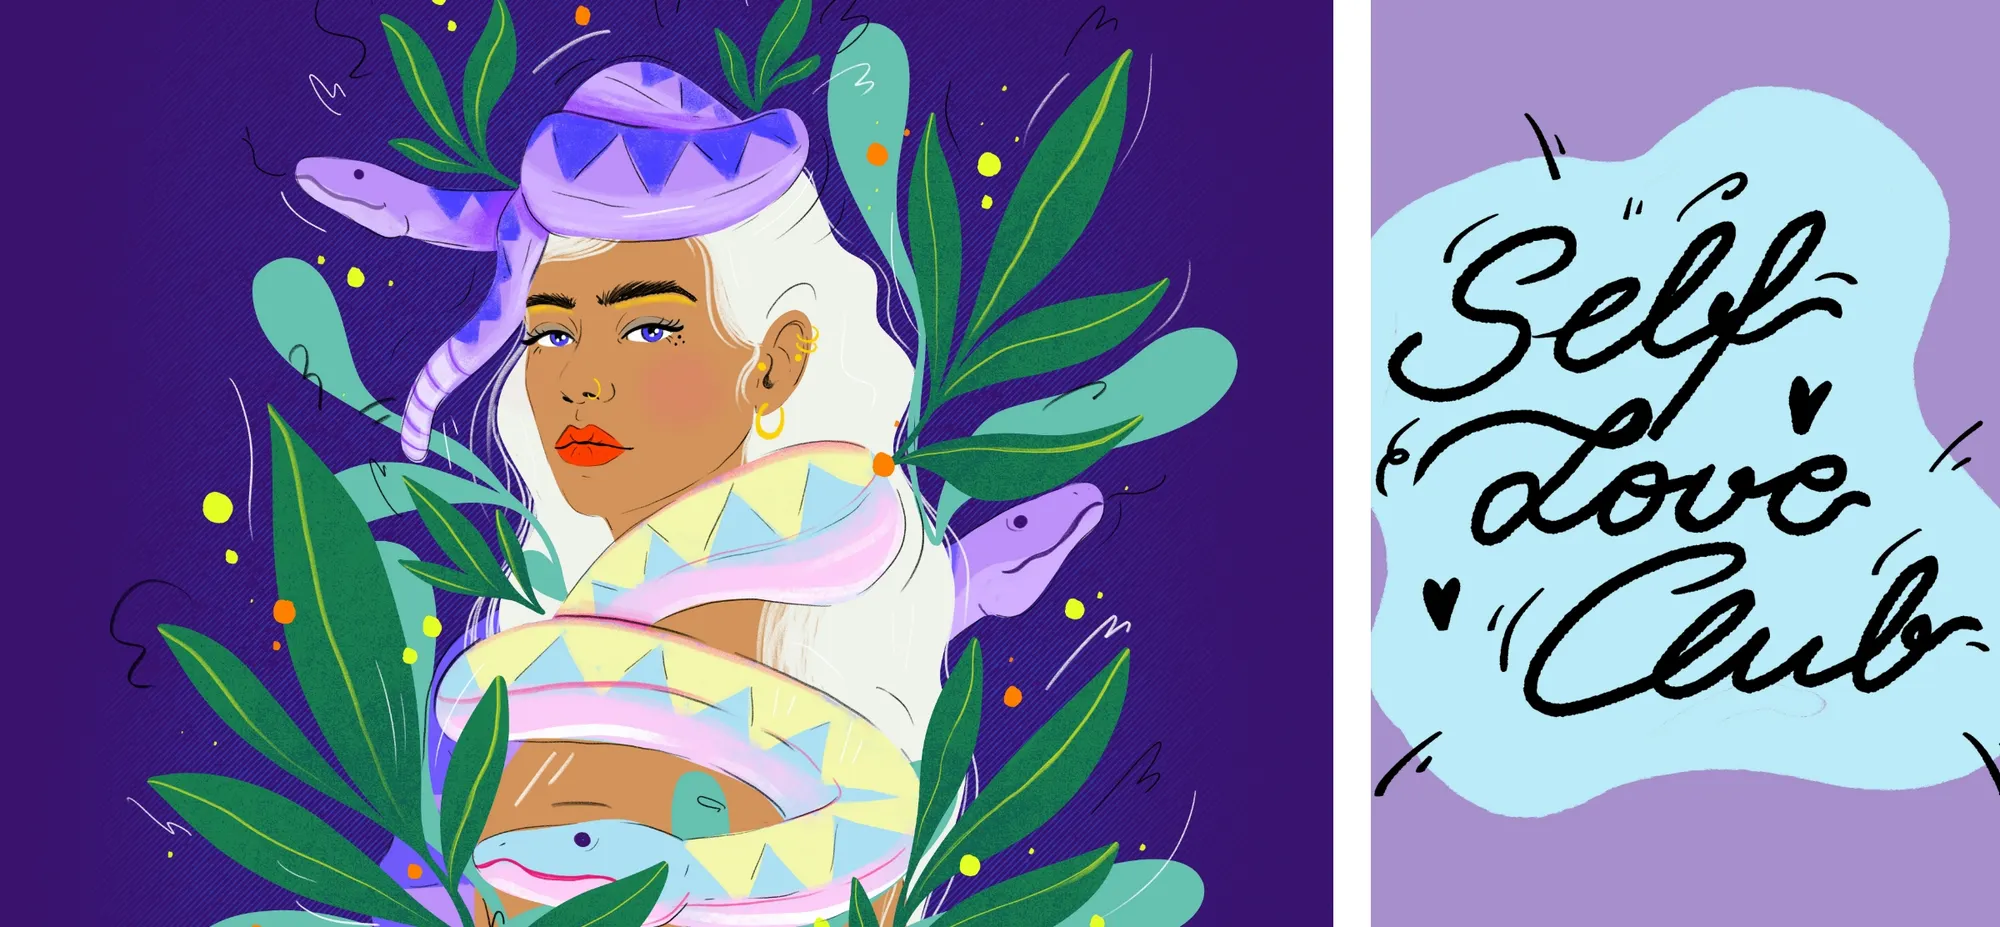 Left image: girl with snakes and plants. Right image: self love club lettering.